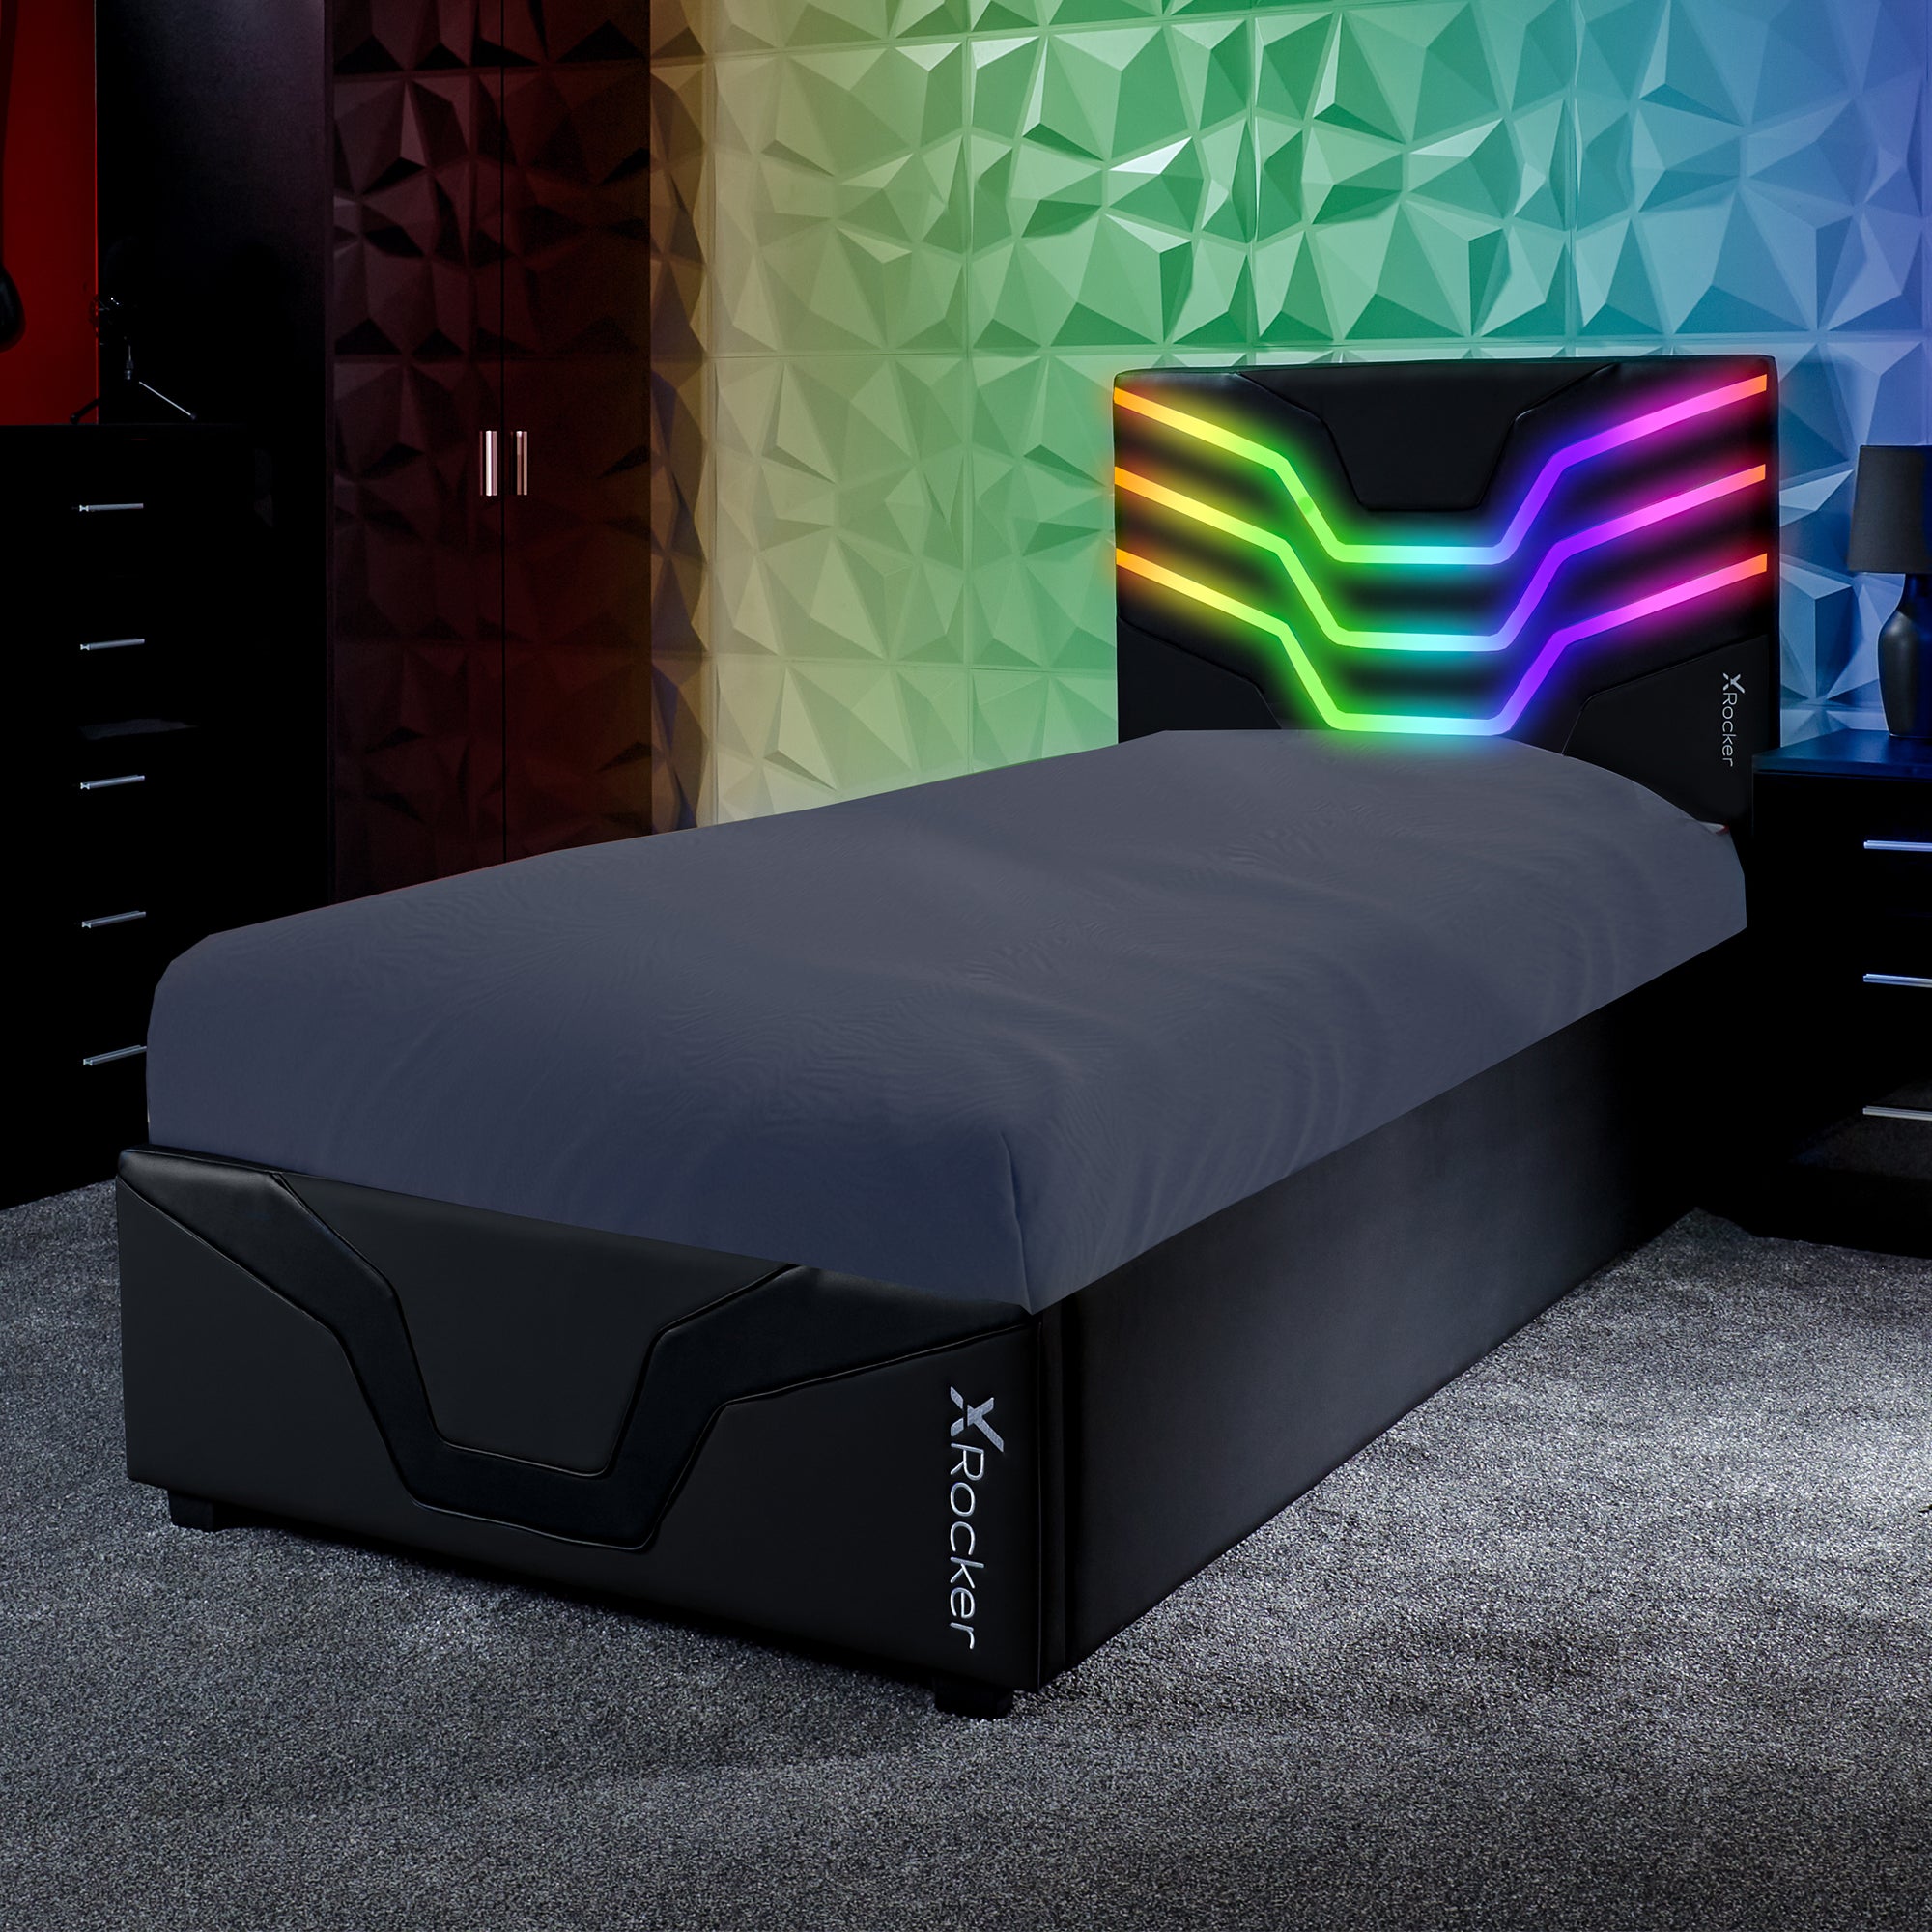 X Rocker Cosmos RGB Single Gaming Ottoman Bed In Box with Neo Motion LED